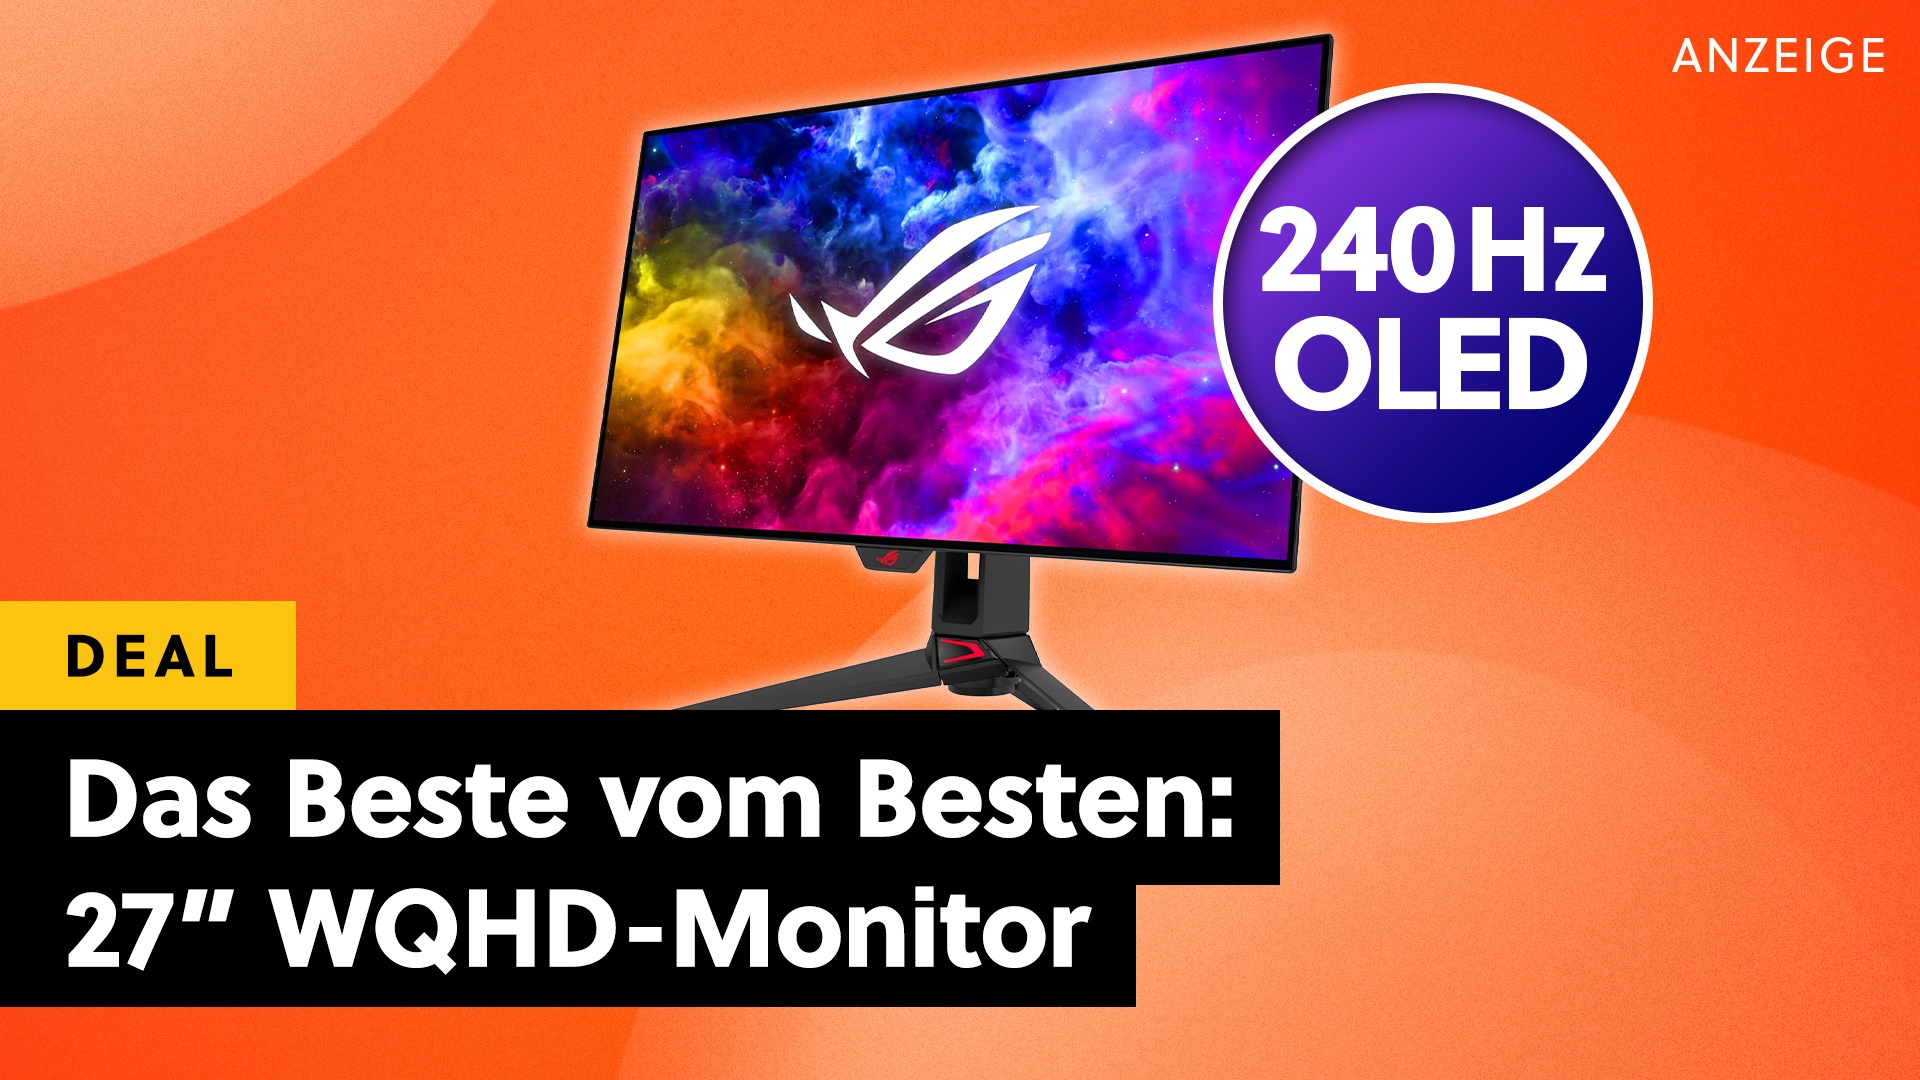 This is the brightest and best 27-inch OLED monitor for gaming with WQHD resolution and it's on sale on Amazon now!